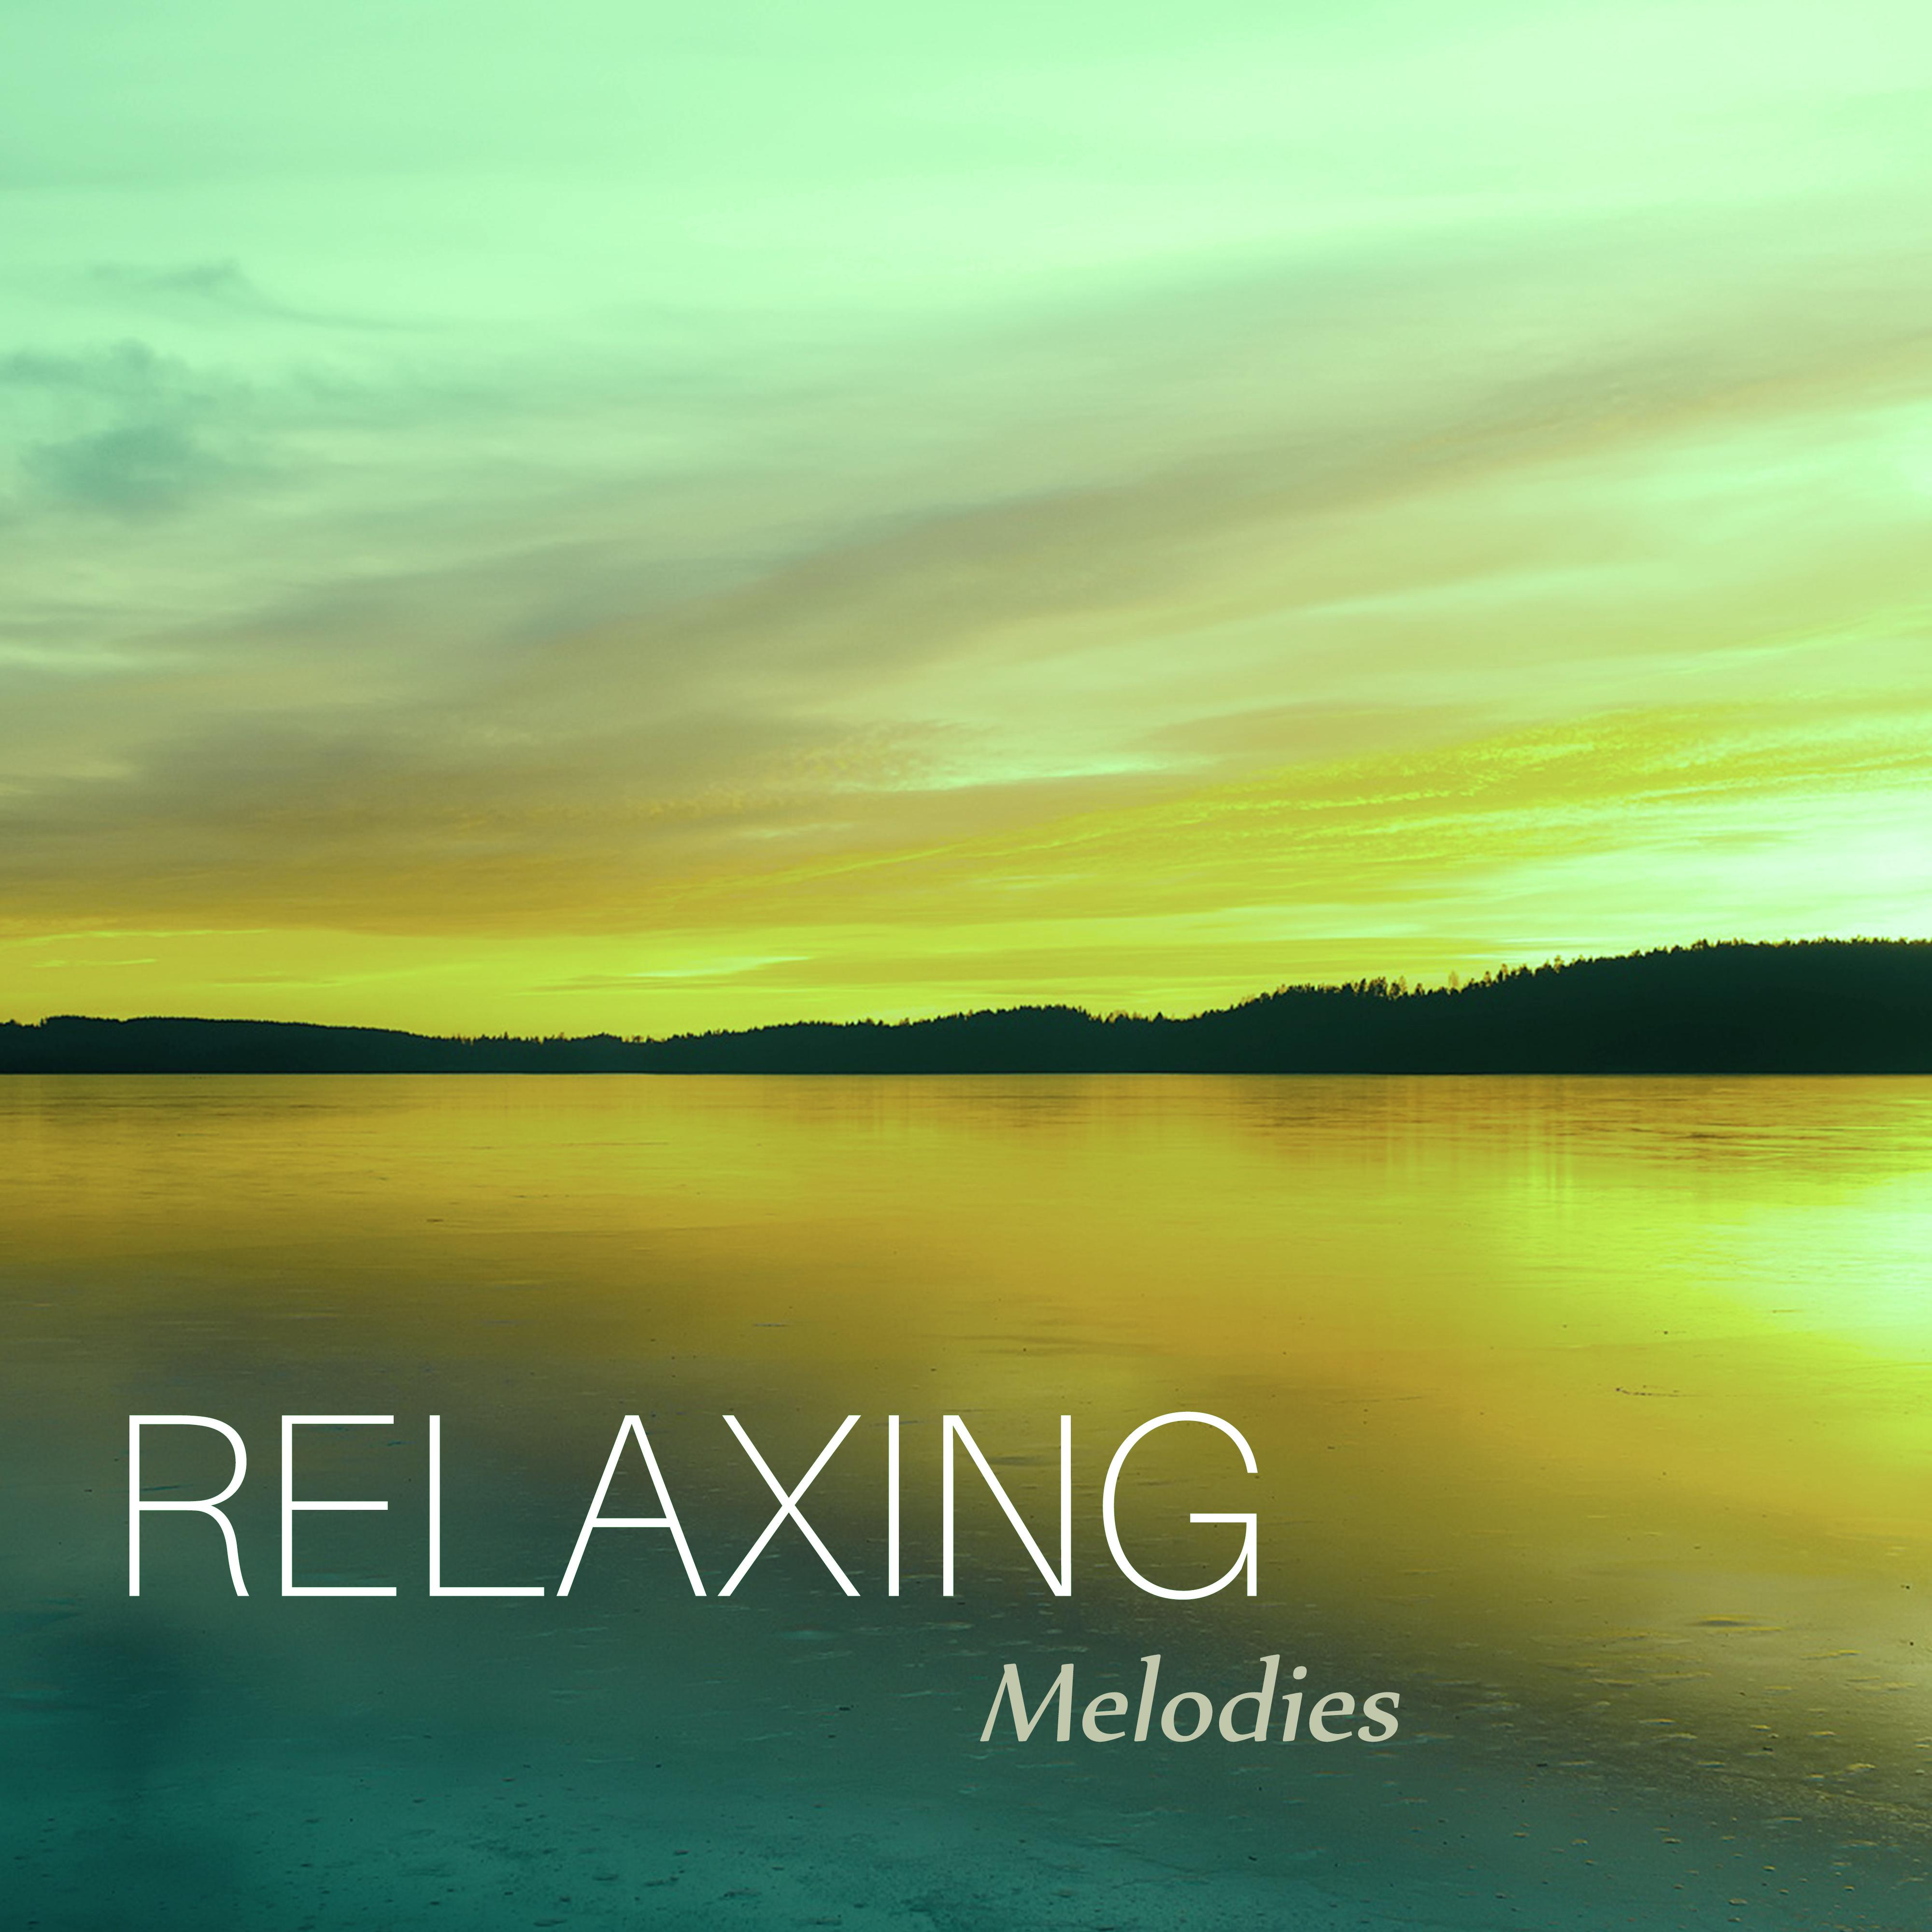 Relaxing Melodies  Inner Peace, Stress Free, New Age Music to Calm Down, Peaceful Sounds